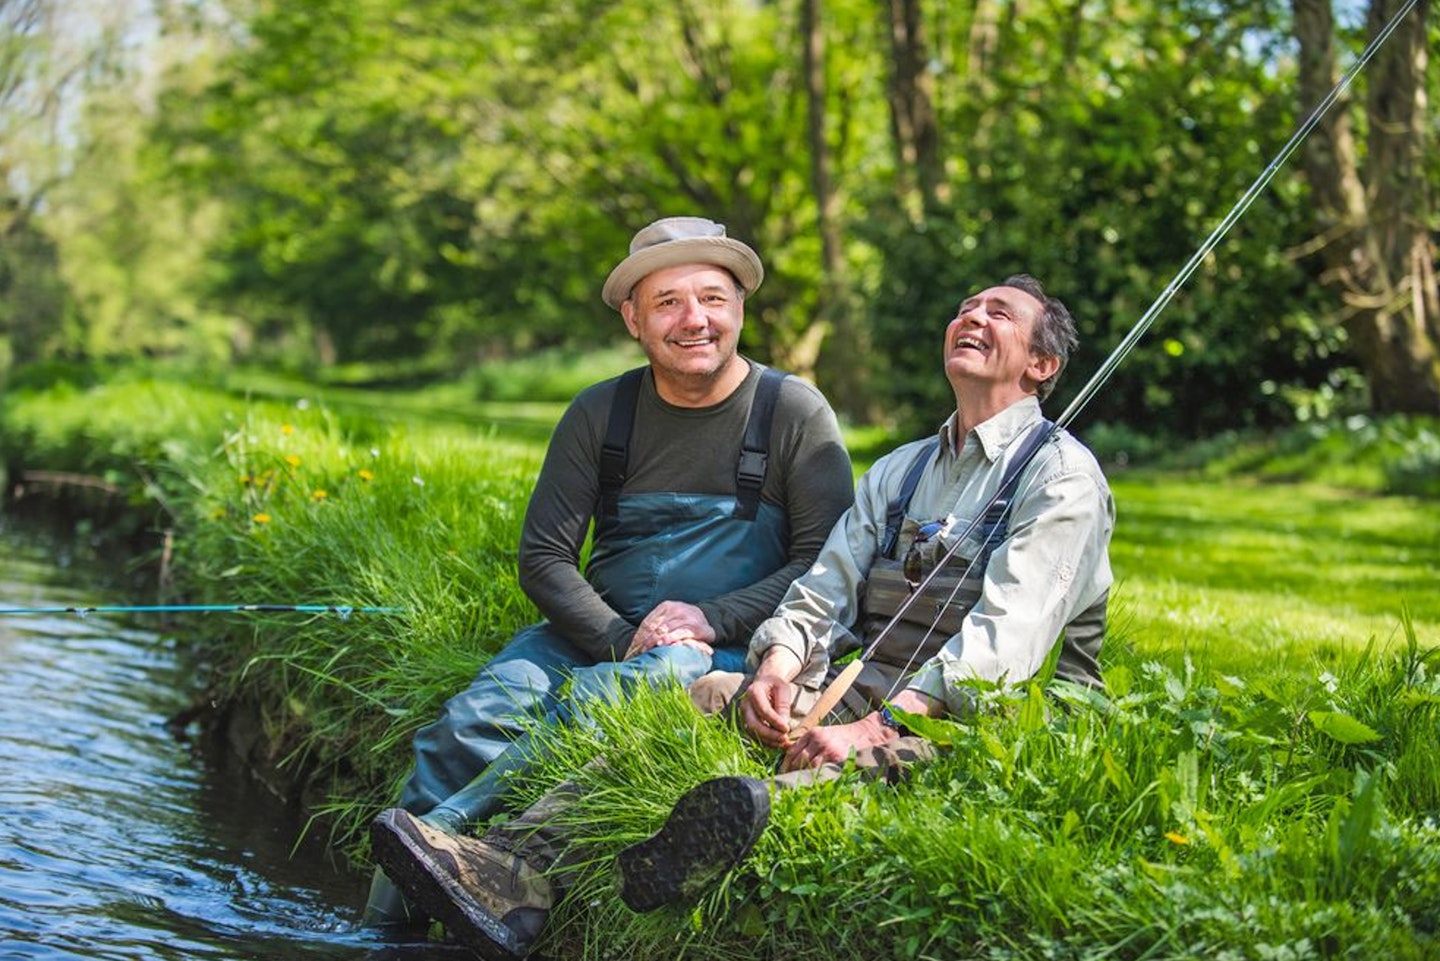 What qualities make for the best of angling buddies?